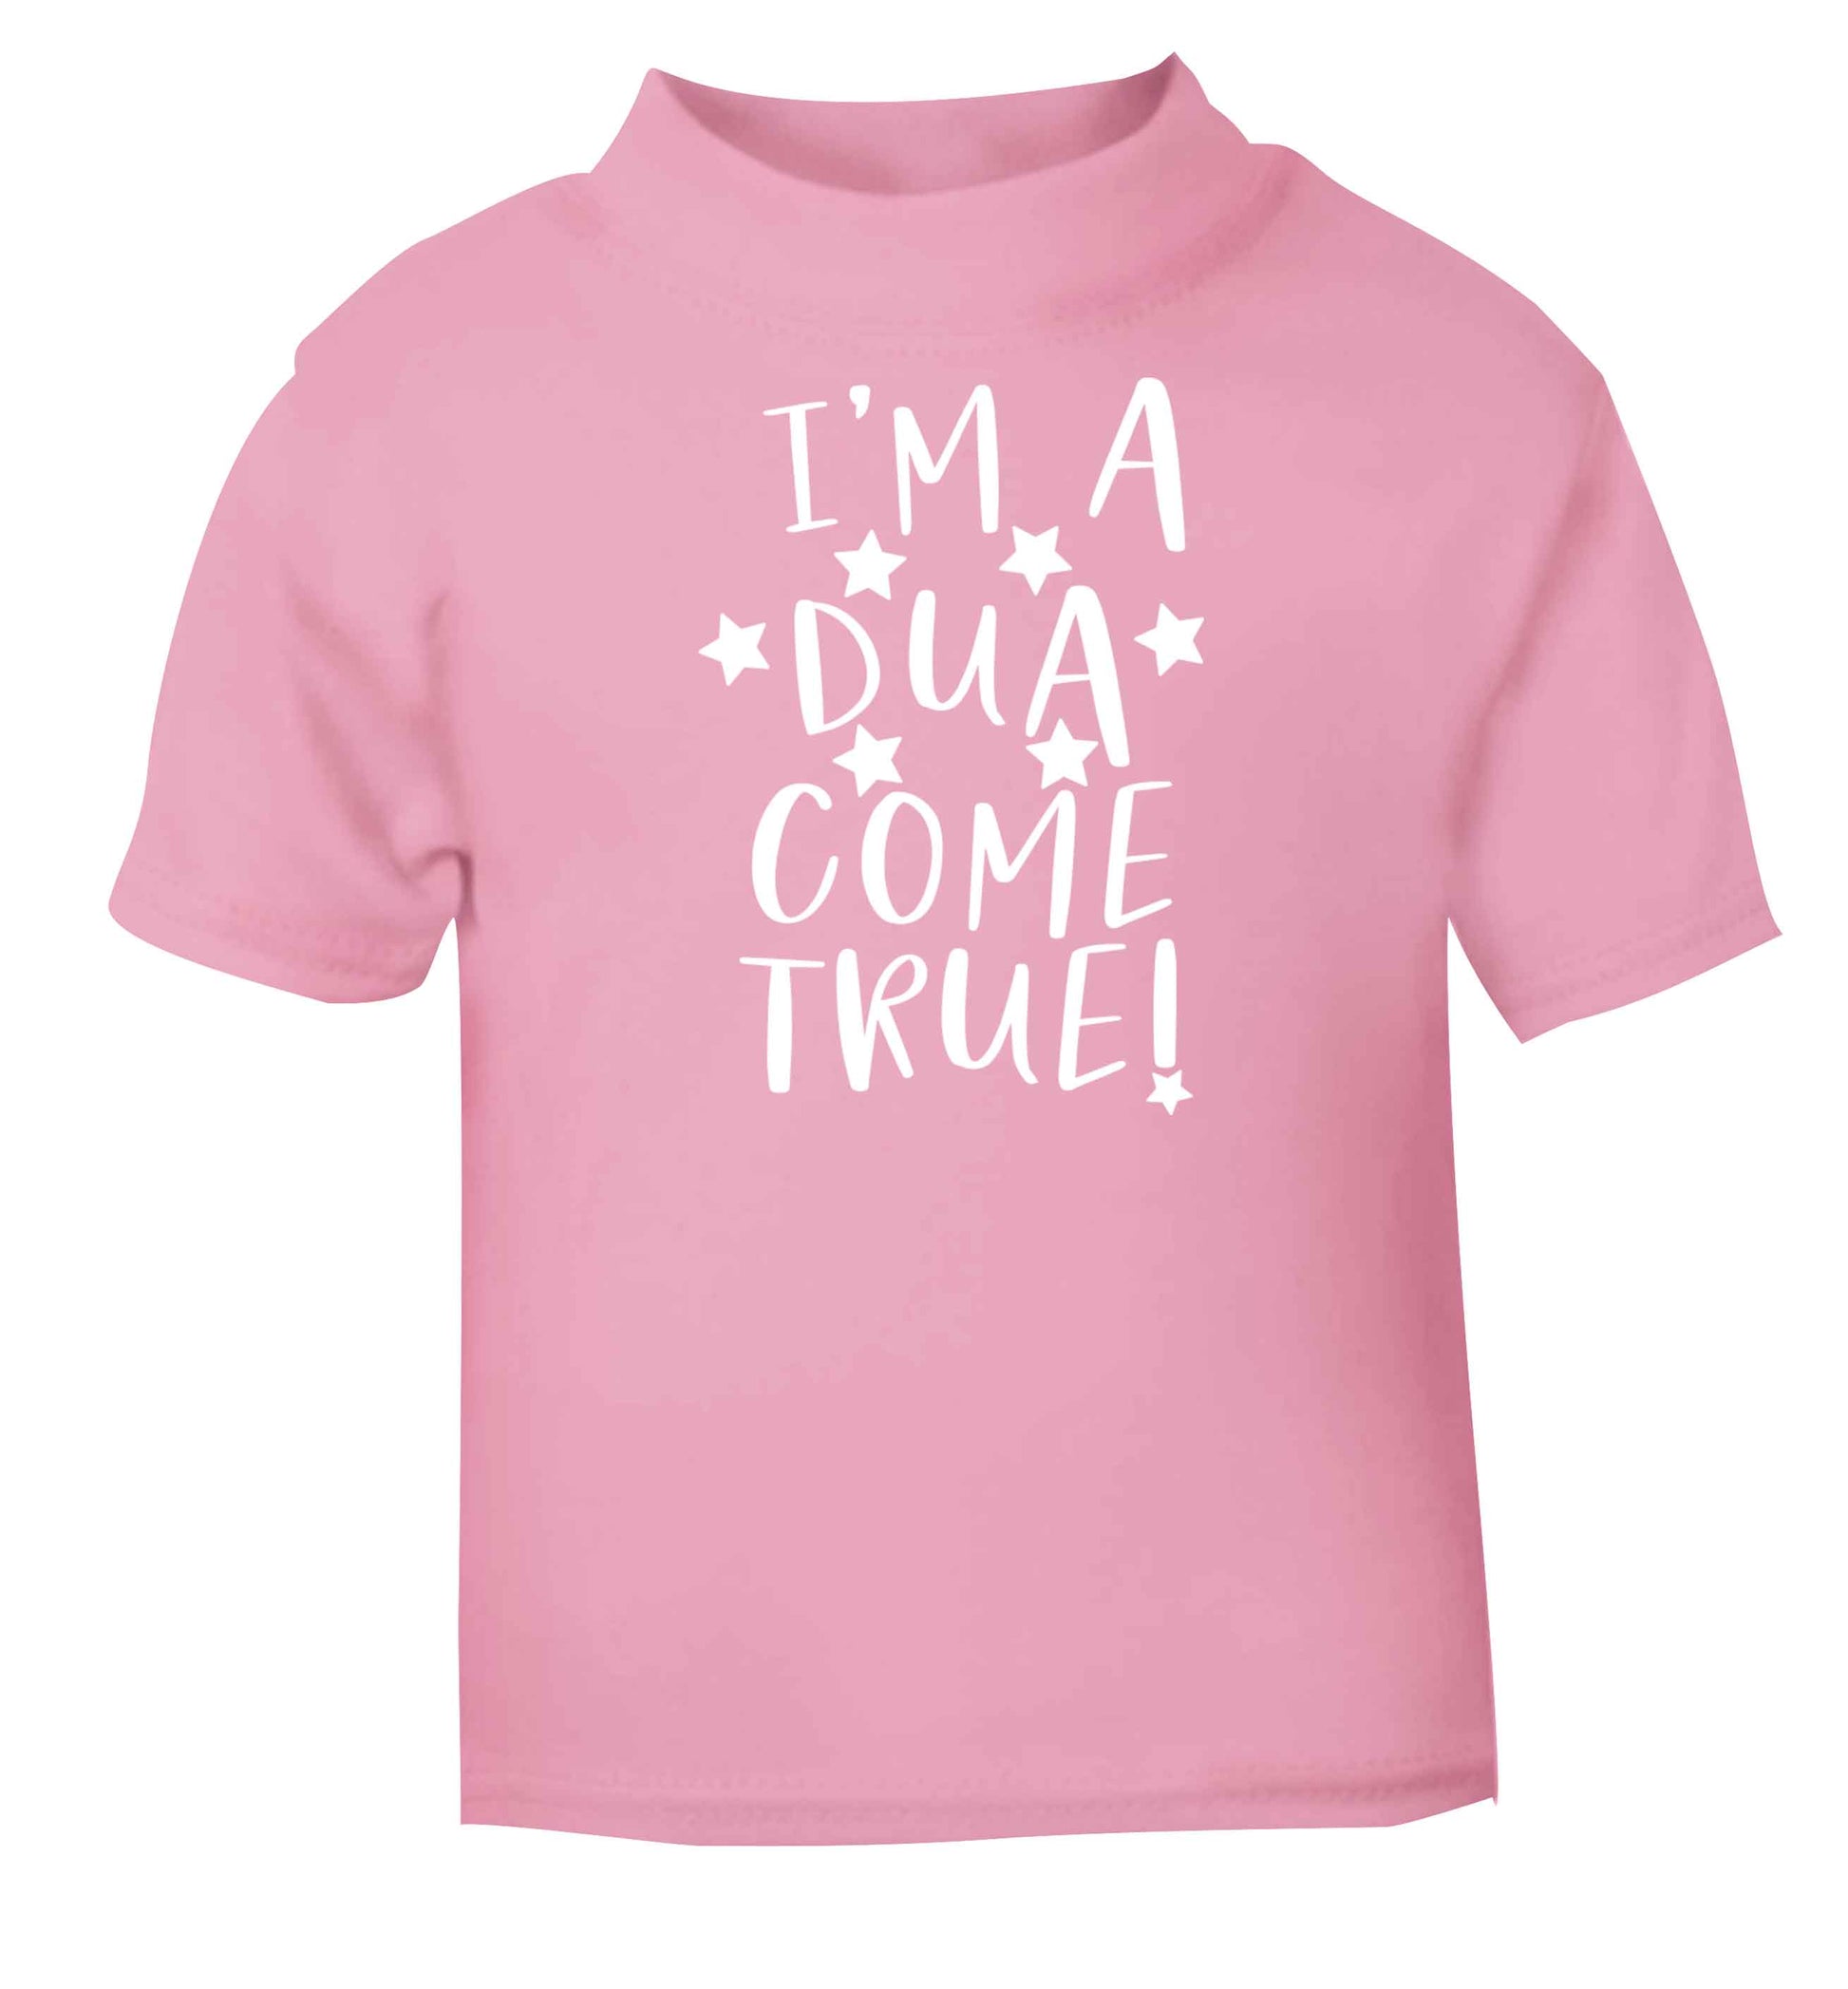 I'm a dua come true light pink baby toddler Tshirt 2 Years